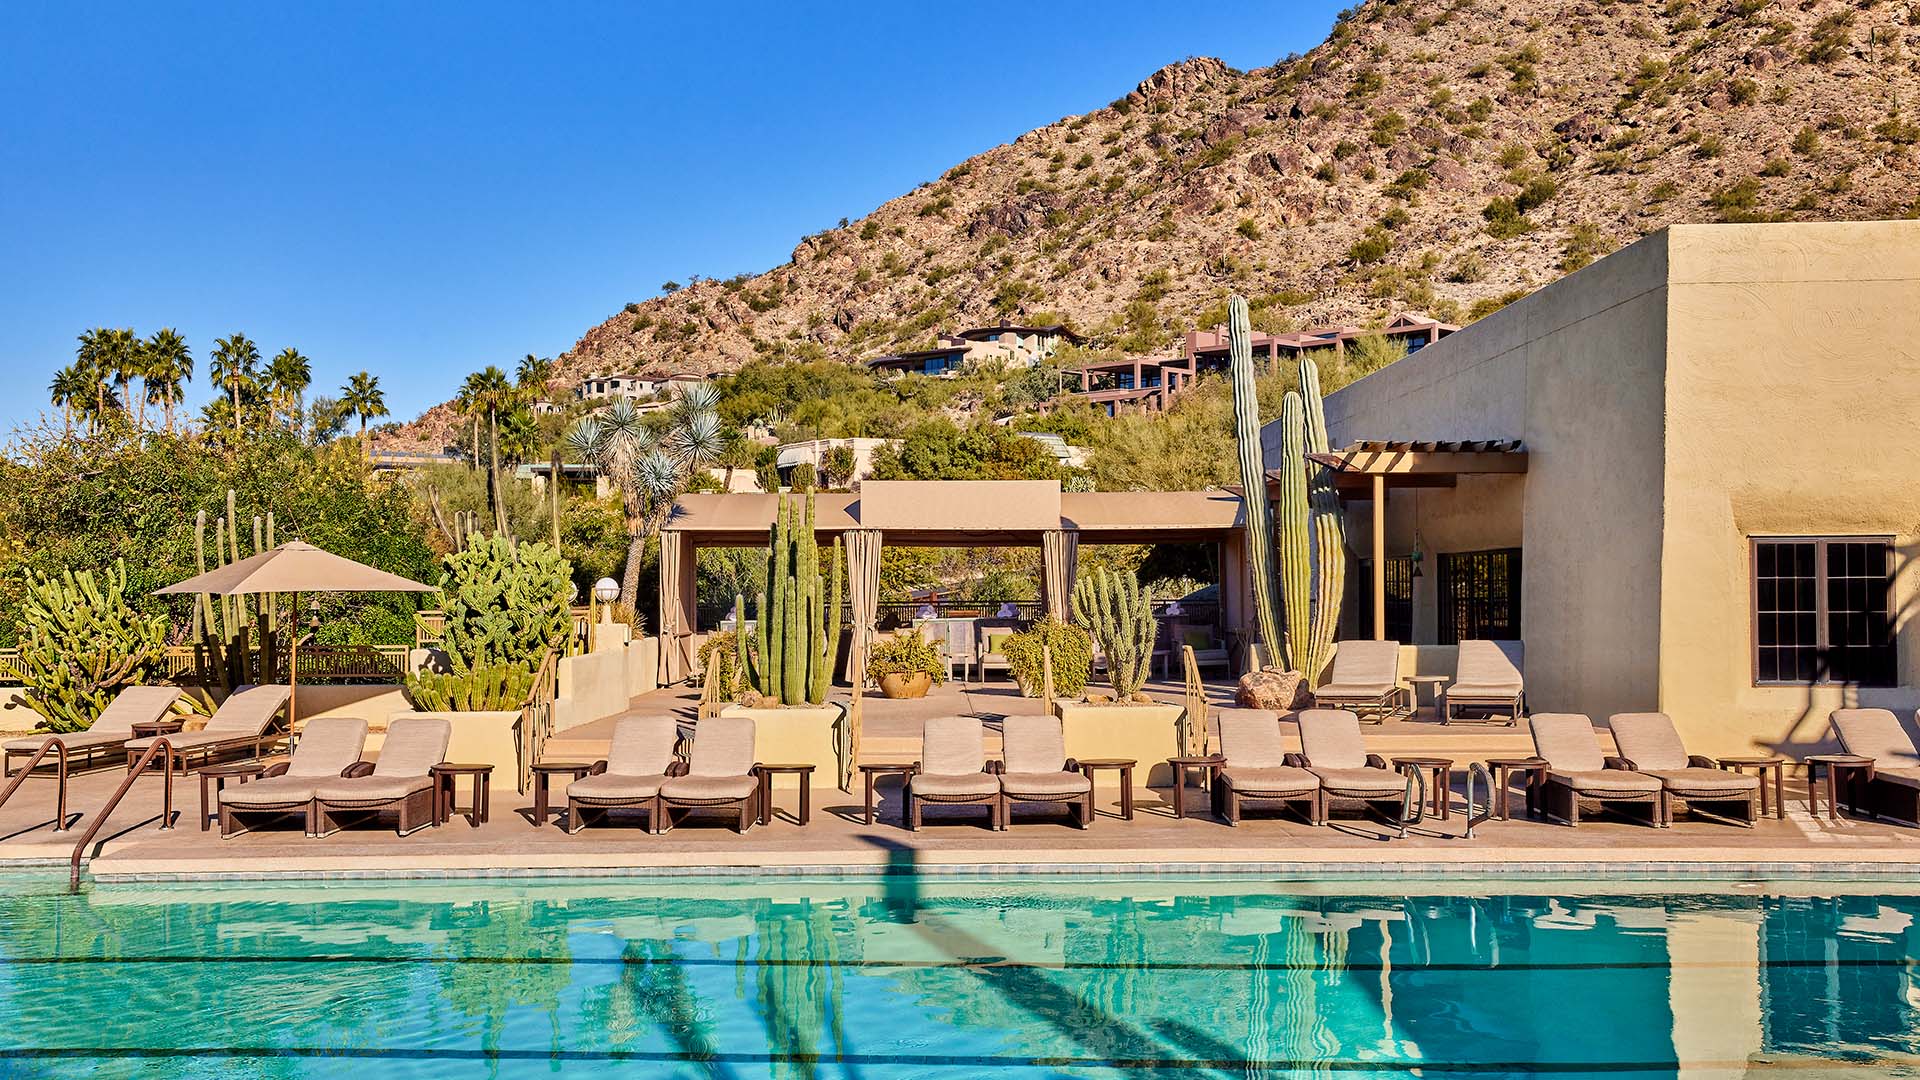 spa pool and cabanas in desert mountains with palm trees and cacti at the JW Marriot Scottsdale Camelback Inn Resort & Spa